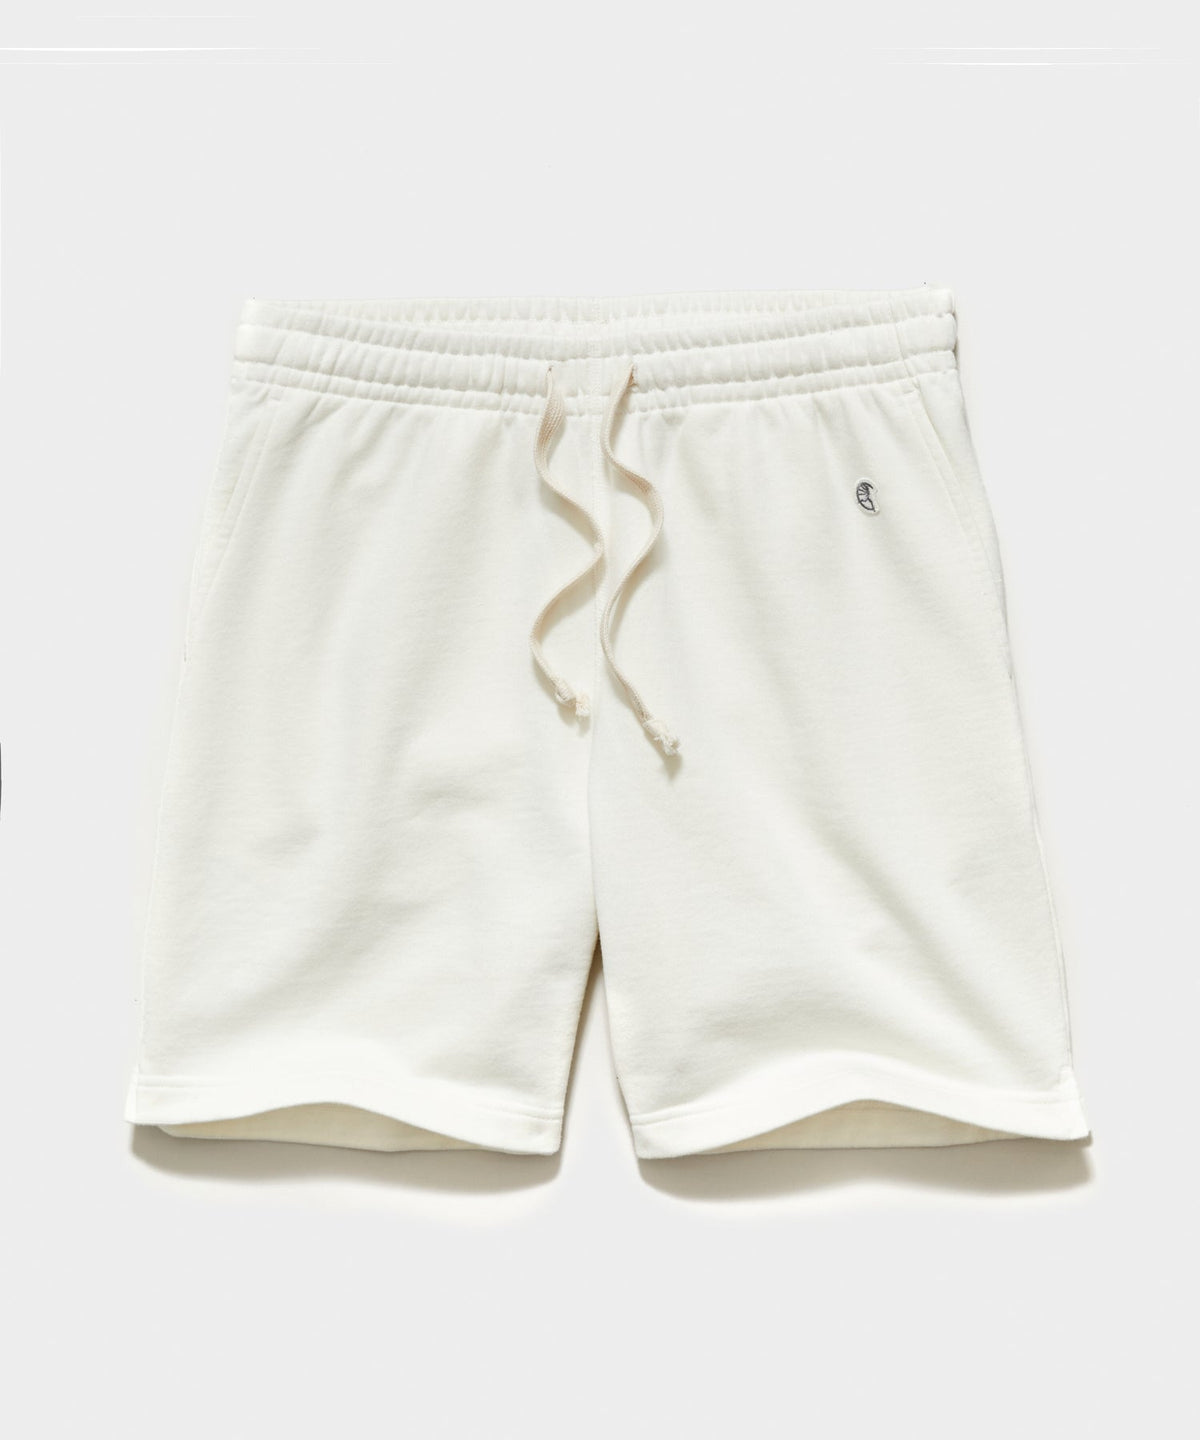 7" Midweight Warm Up Short in Antique White